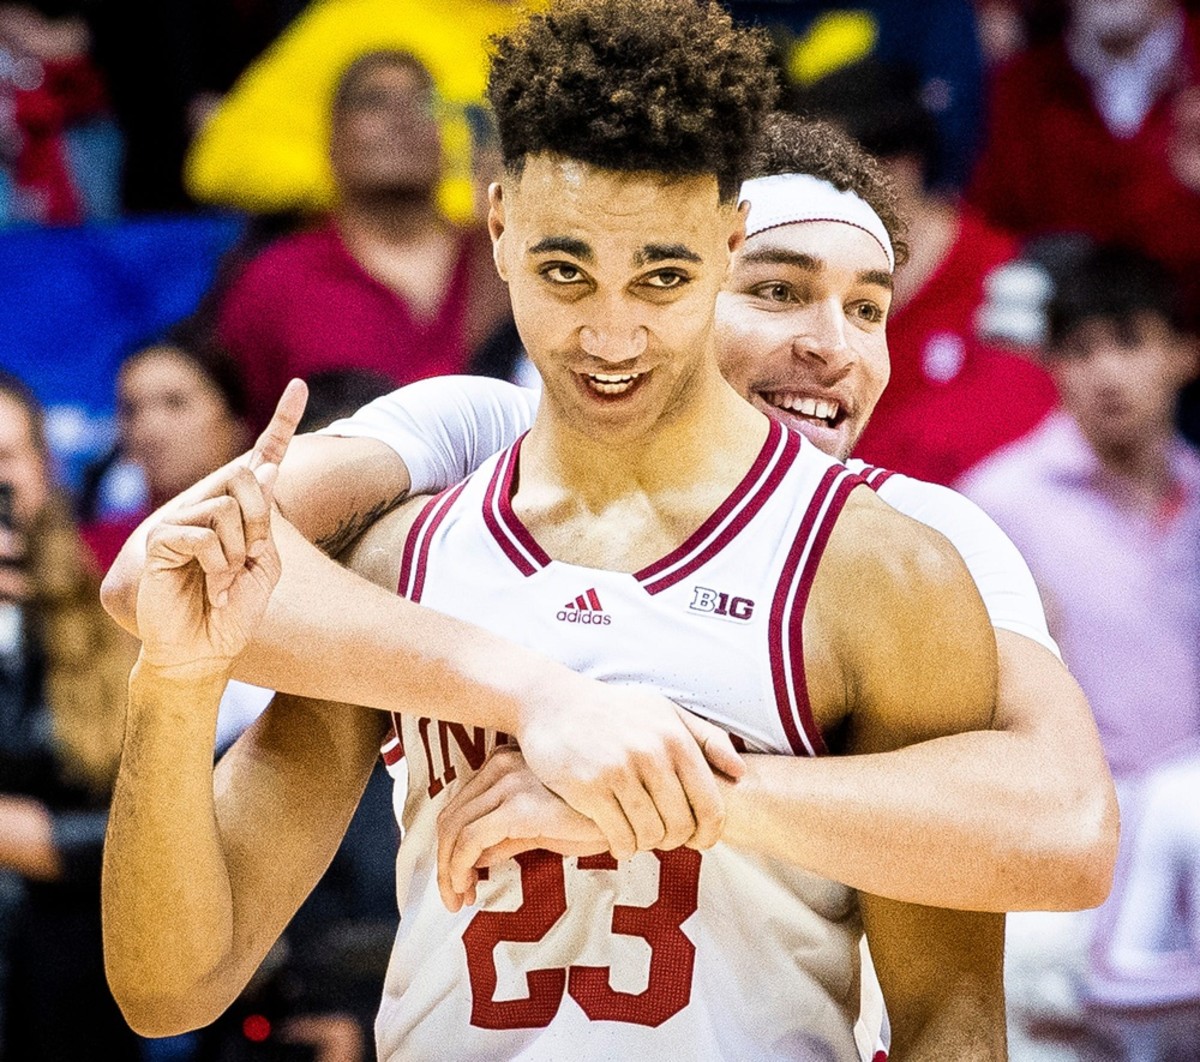 Trayce Jackson-Davis (23) and Race Thompson (25) celebrate the victory after overtime of Indiana versus Michigan.